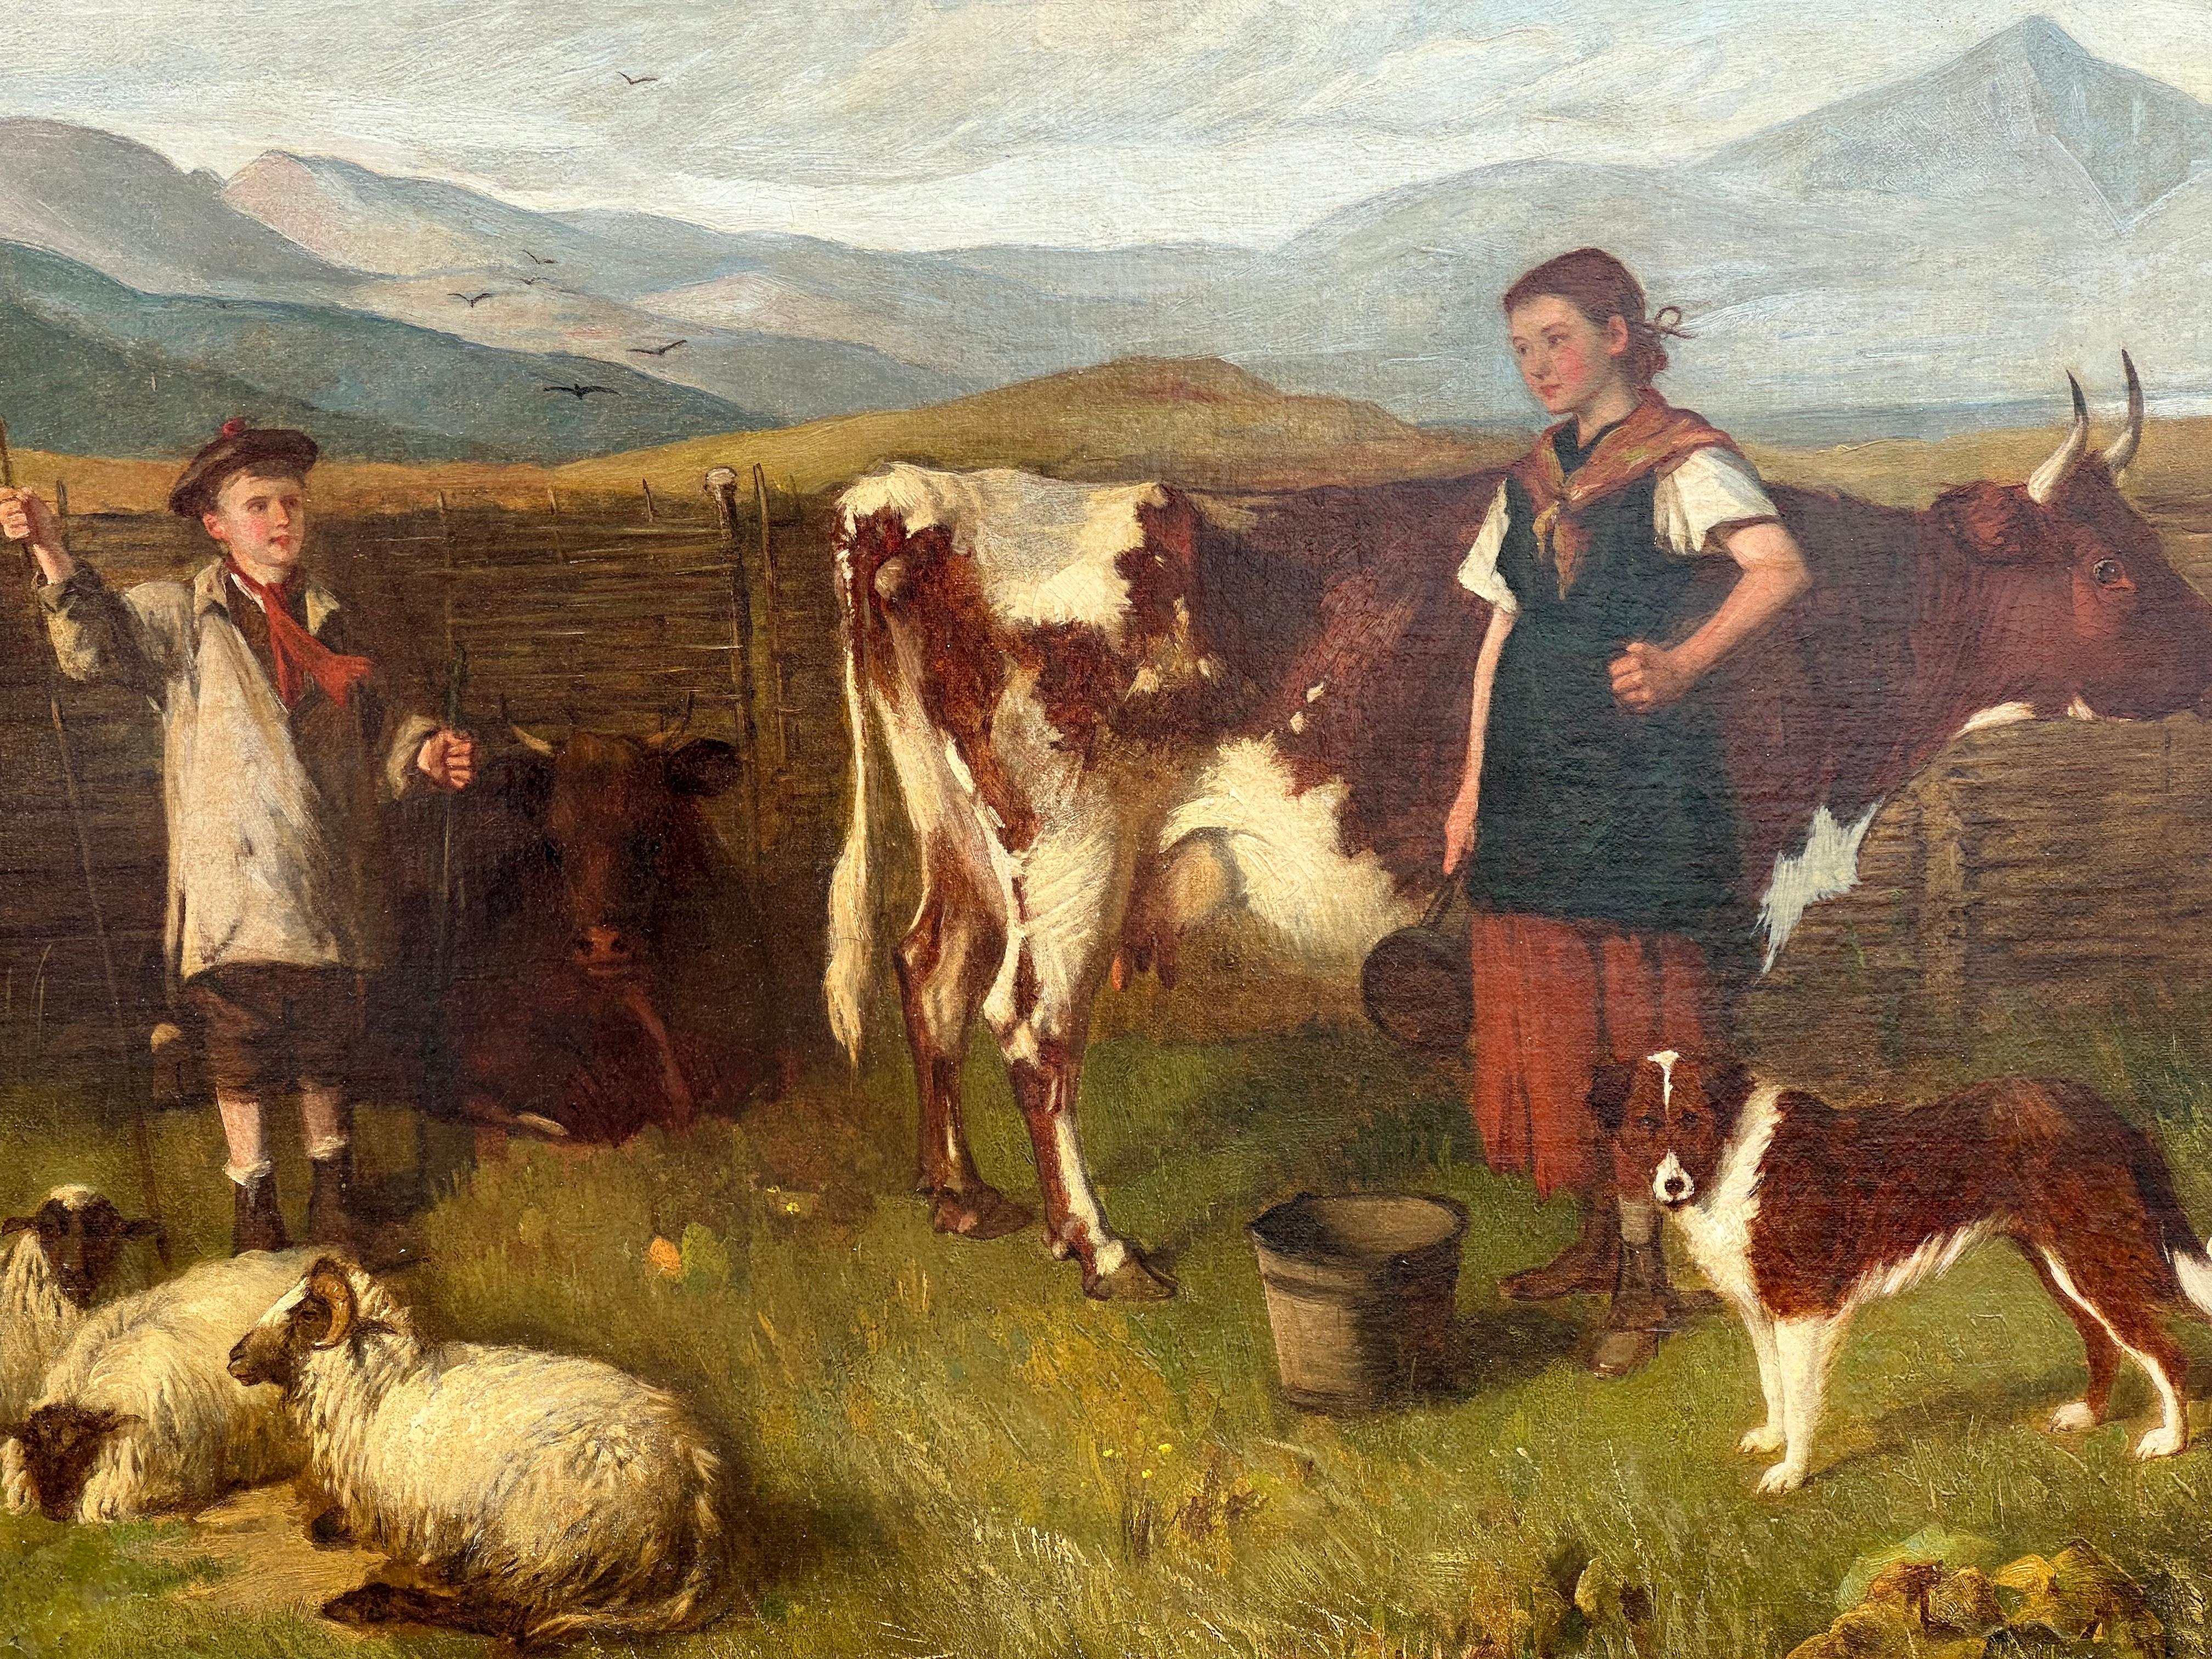 Henry William Banks Davis Figurative Painting - 19th century Scottish farmers with cows , sheep, dogs in the Highlands